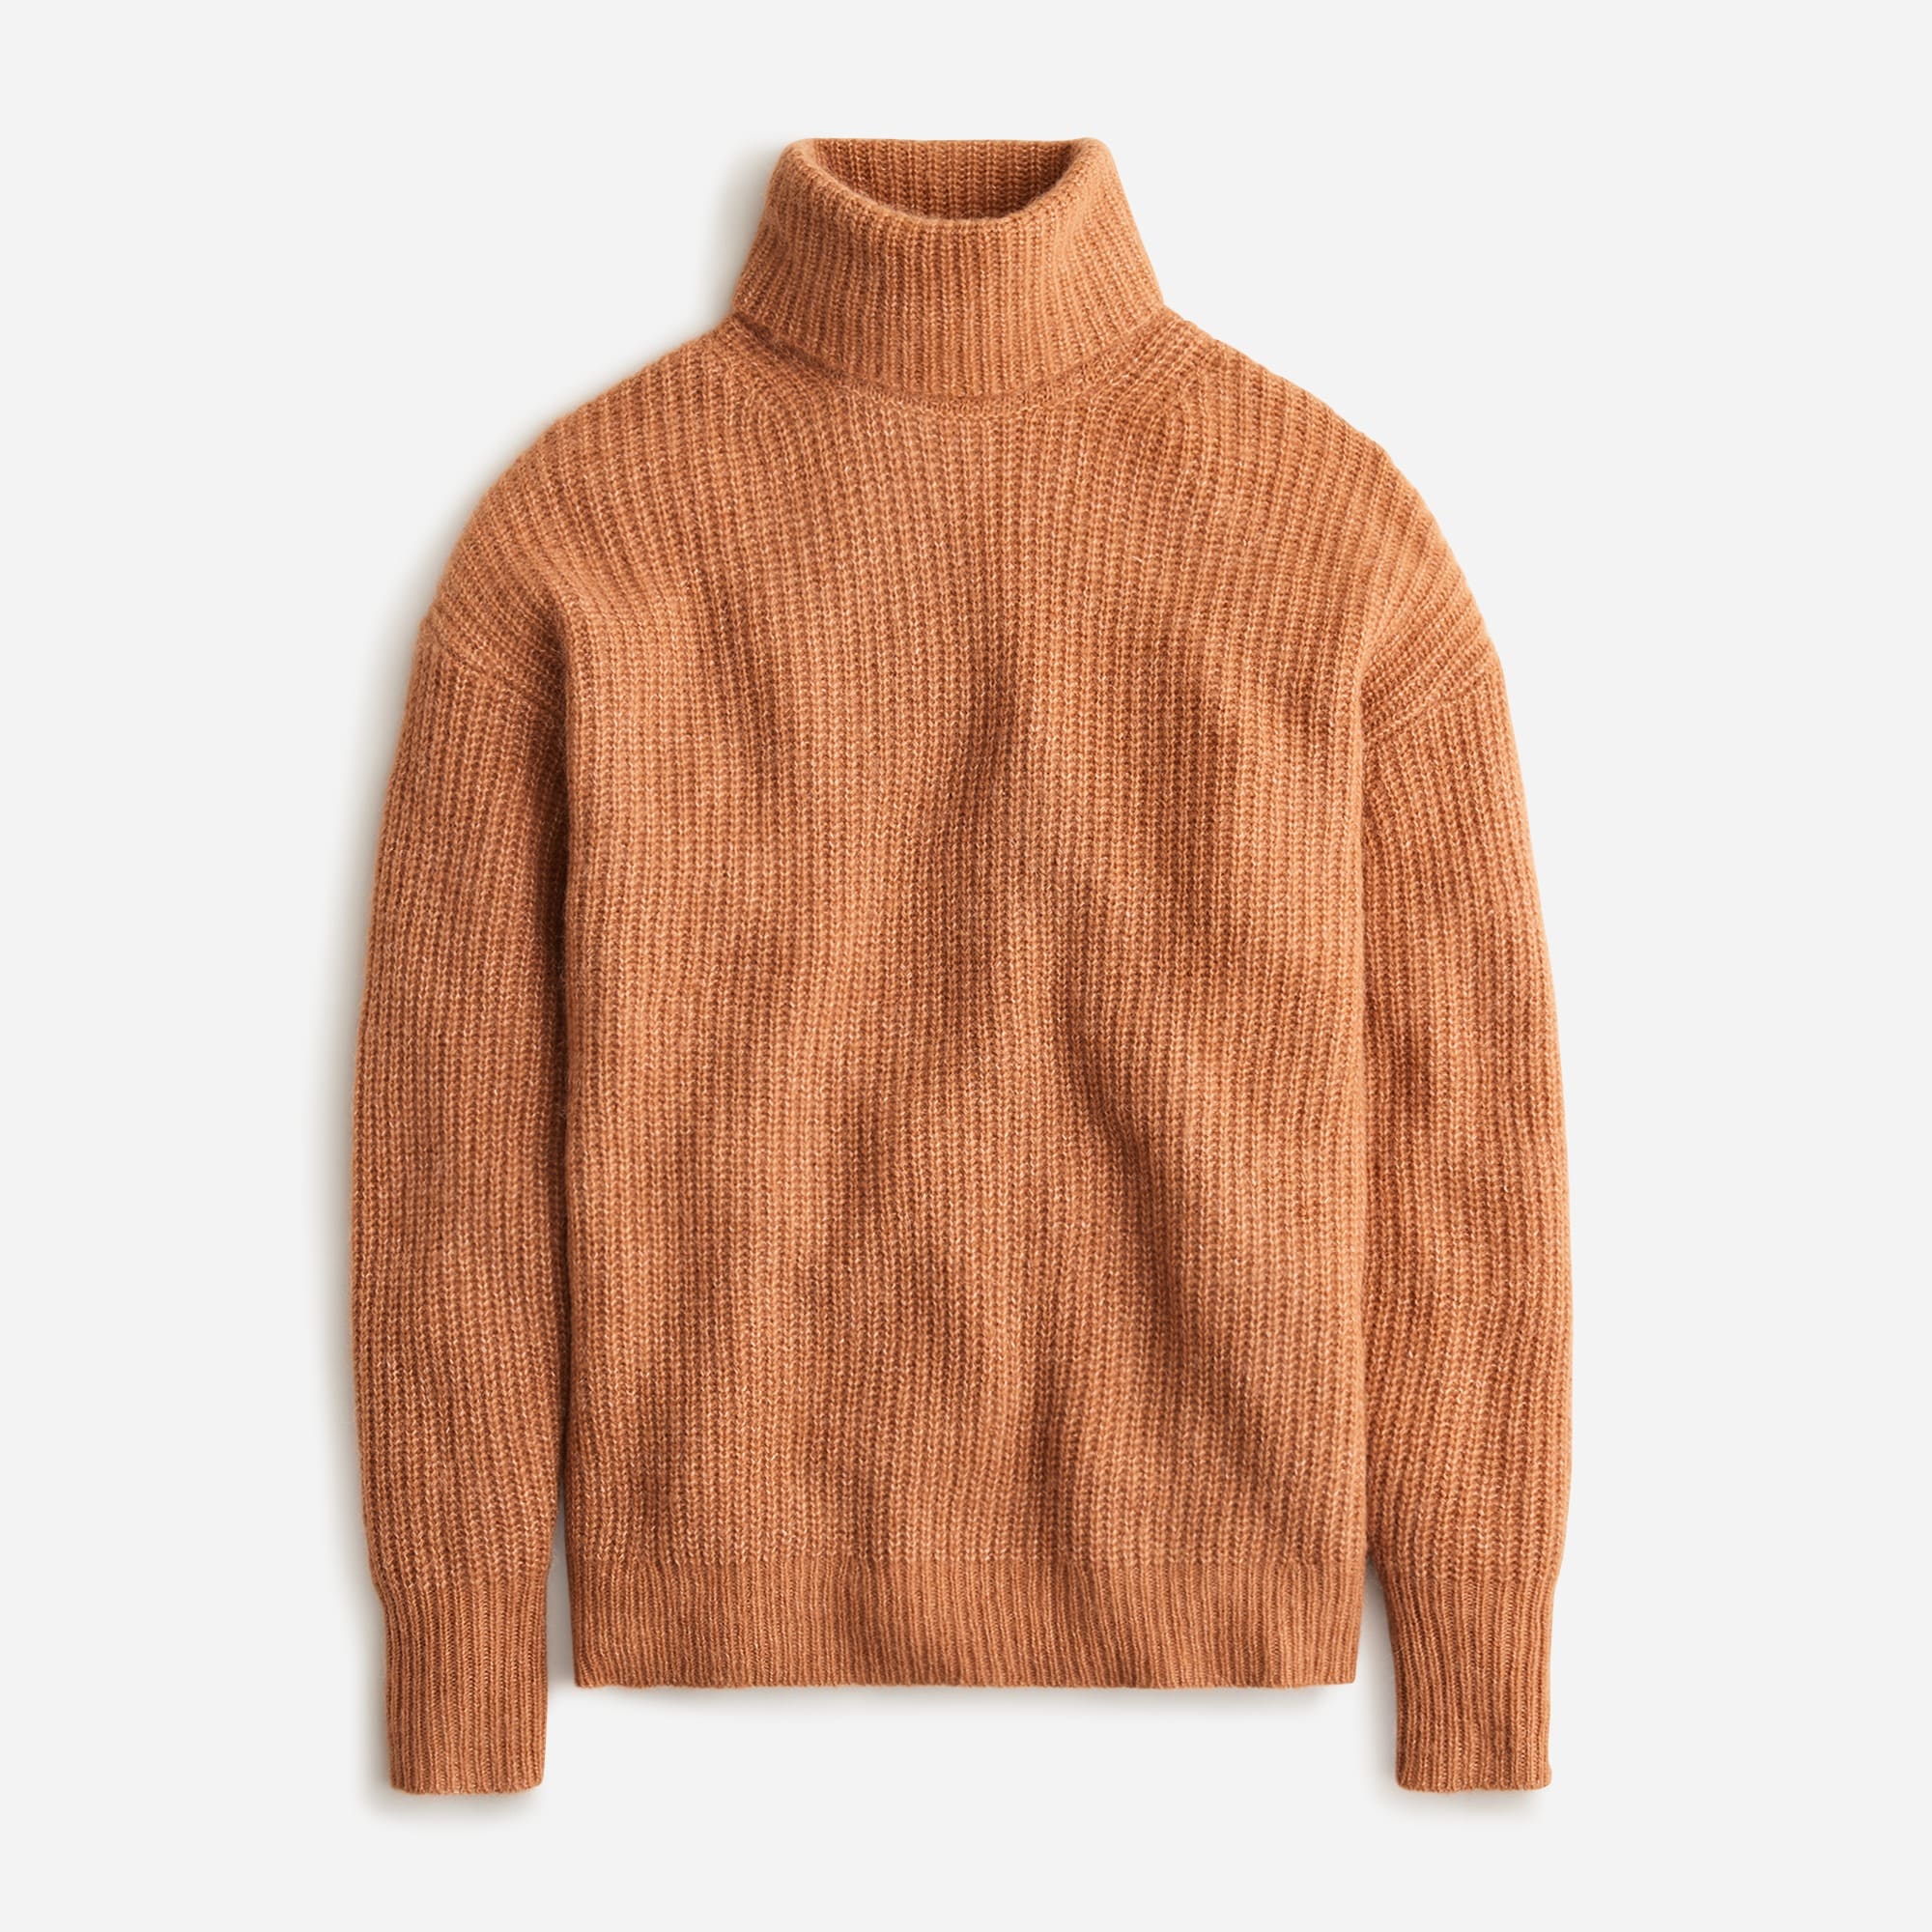  Relaxed turtleneck sweater in brushed yarn